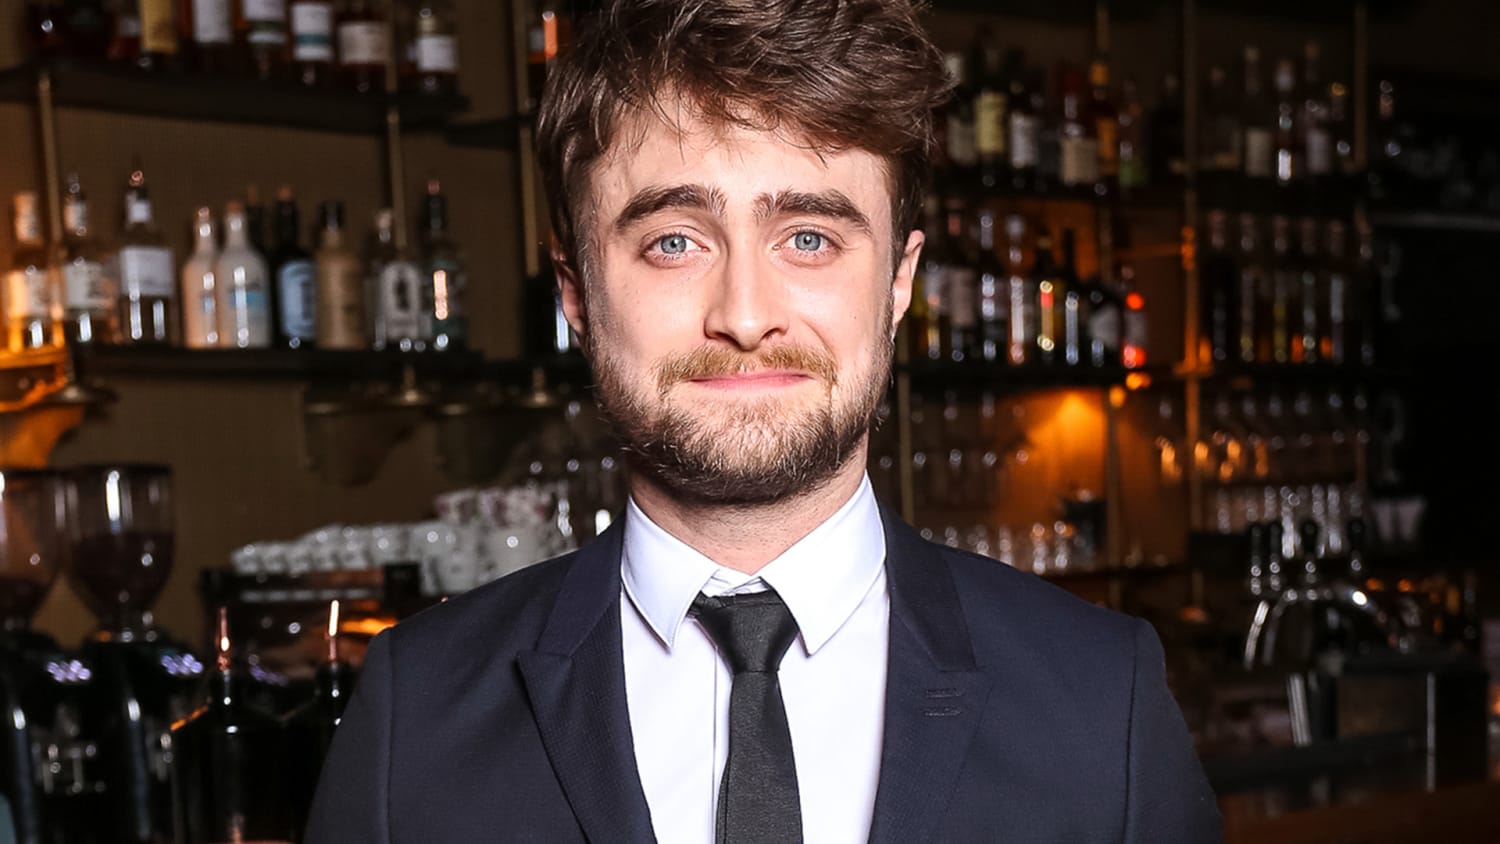 Daniel Radcliffe rushes to help victim of violent mugging in London - 0